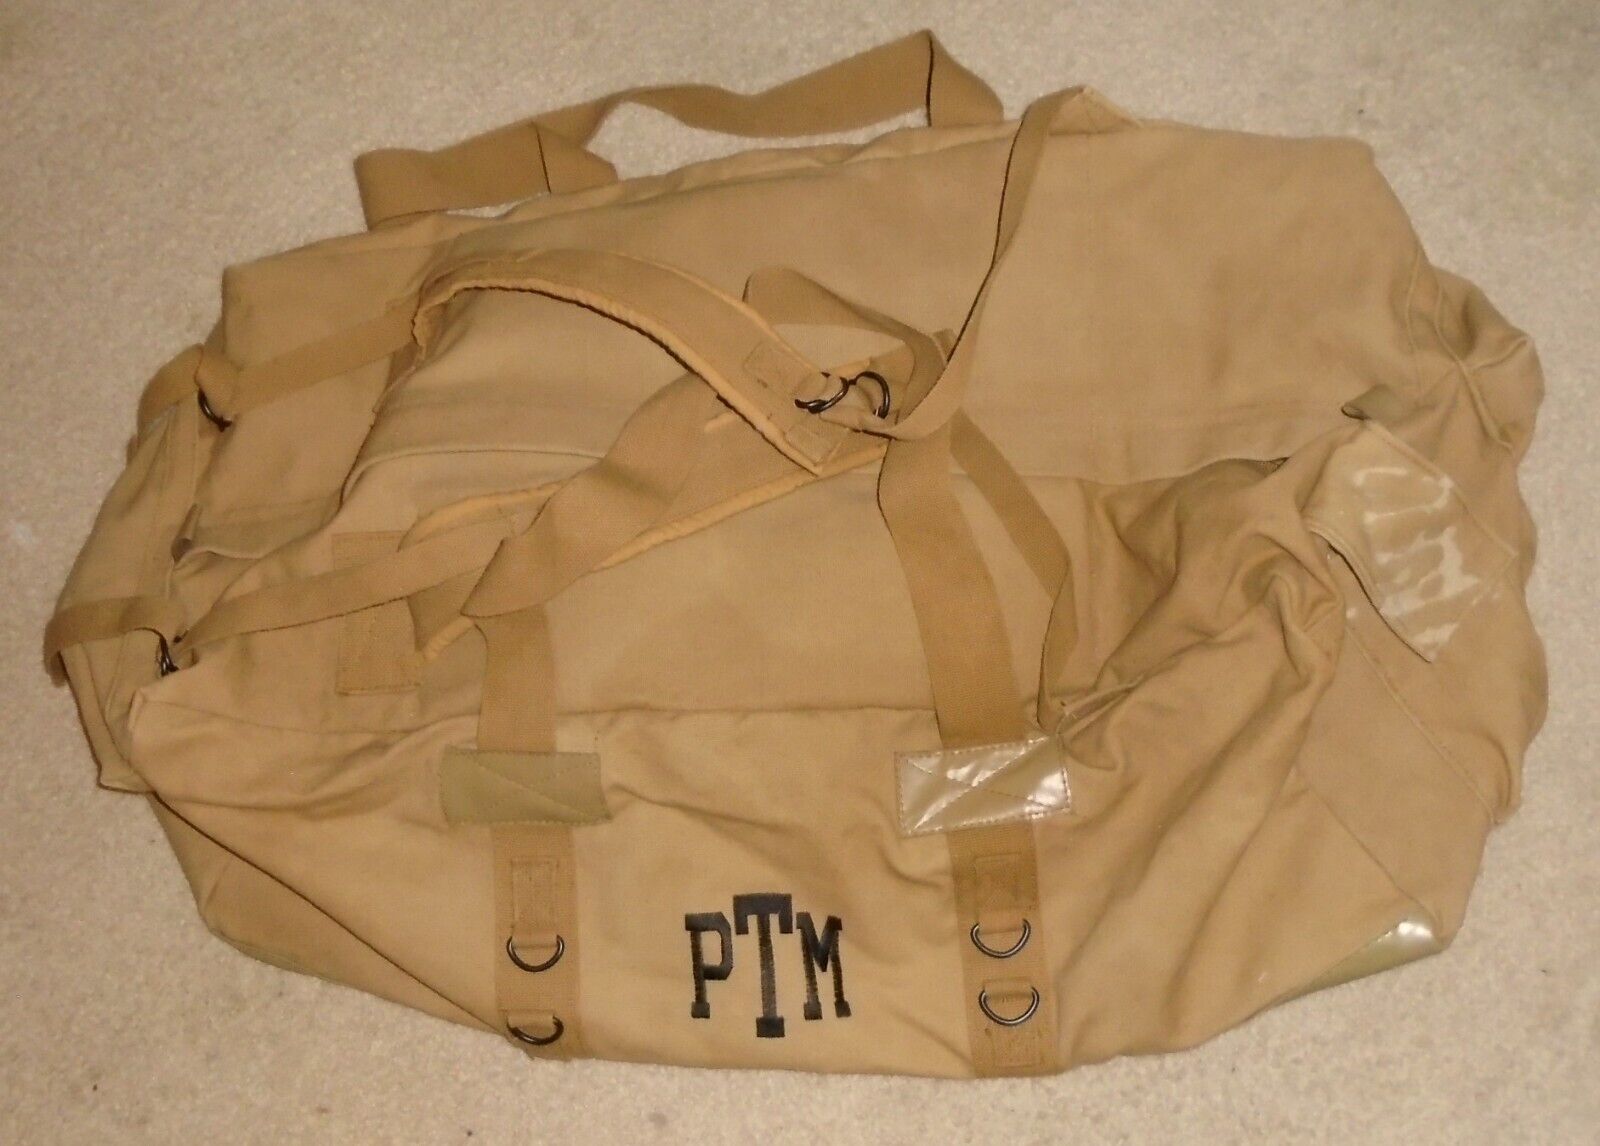 Rothco Military Personnel Transport Module Large duffle bag back pack